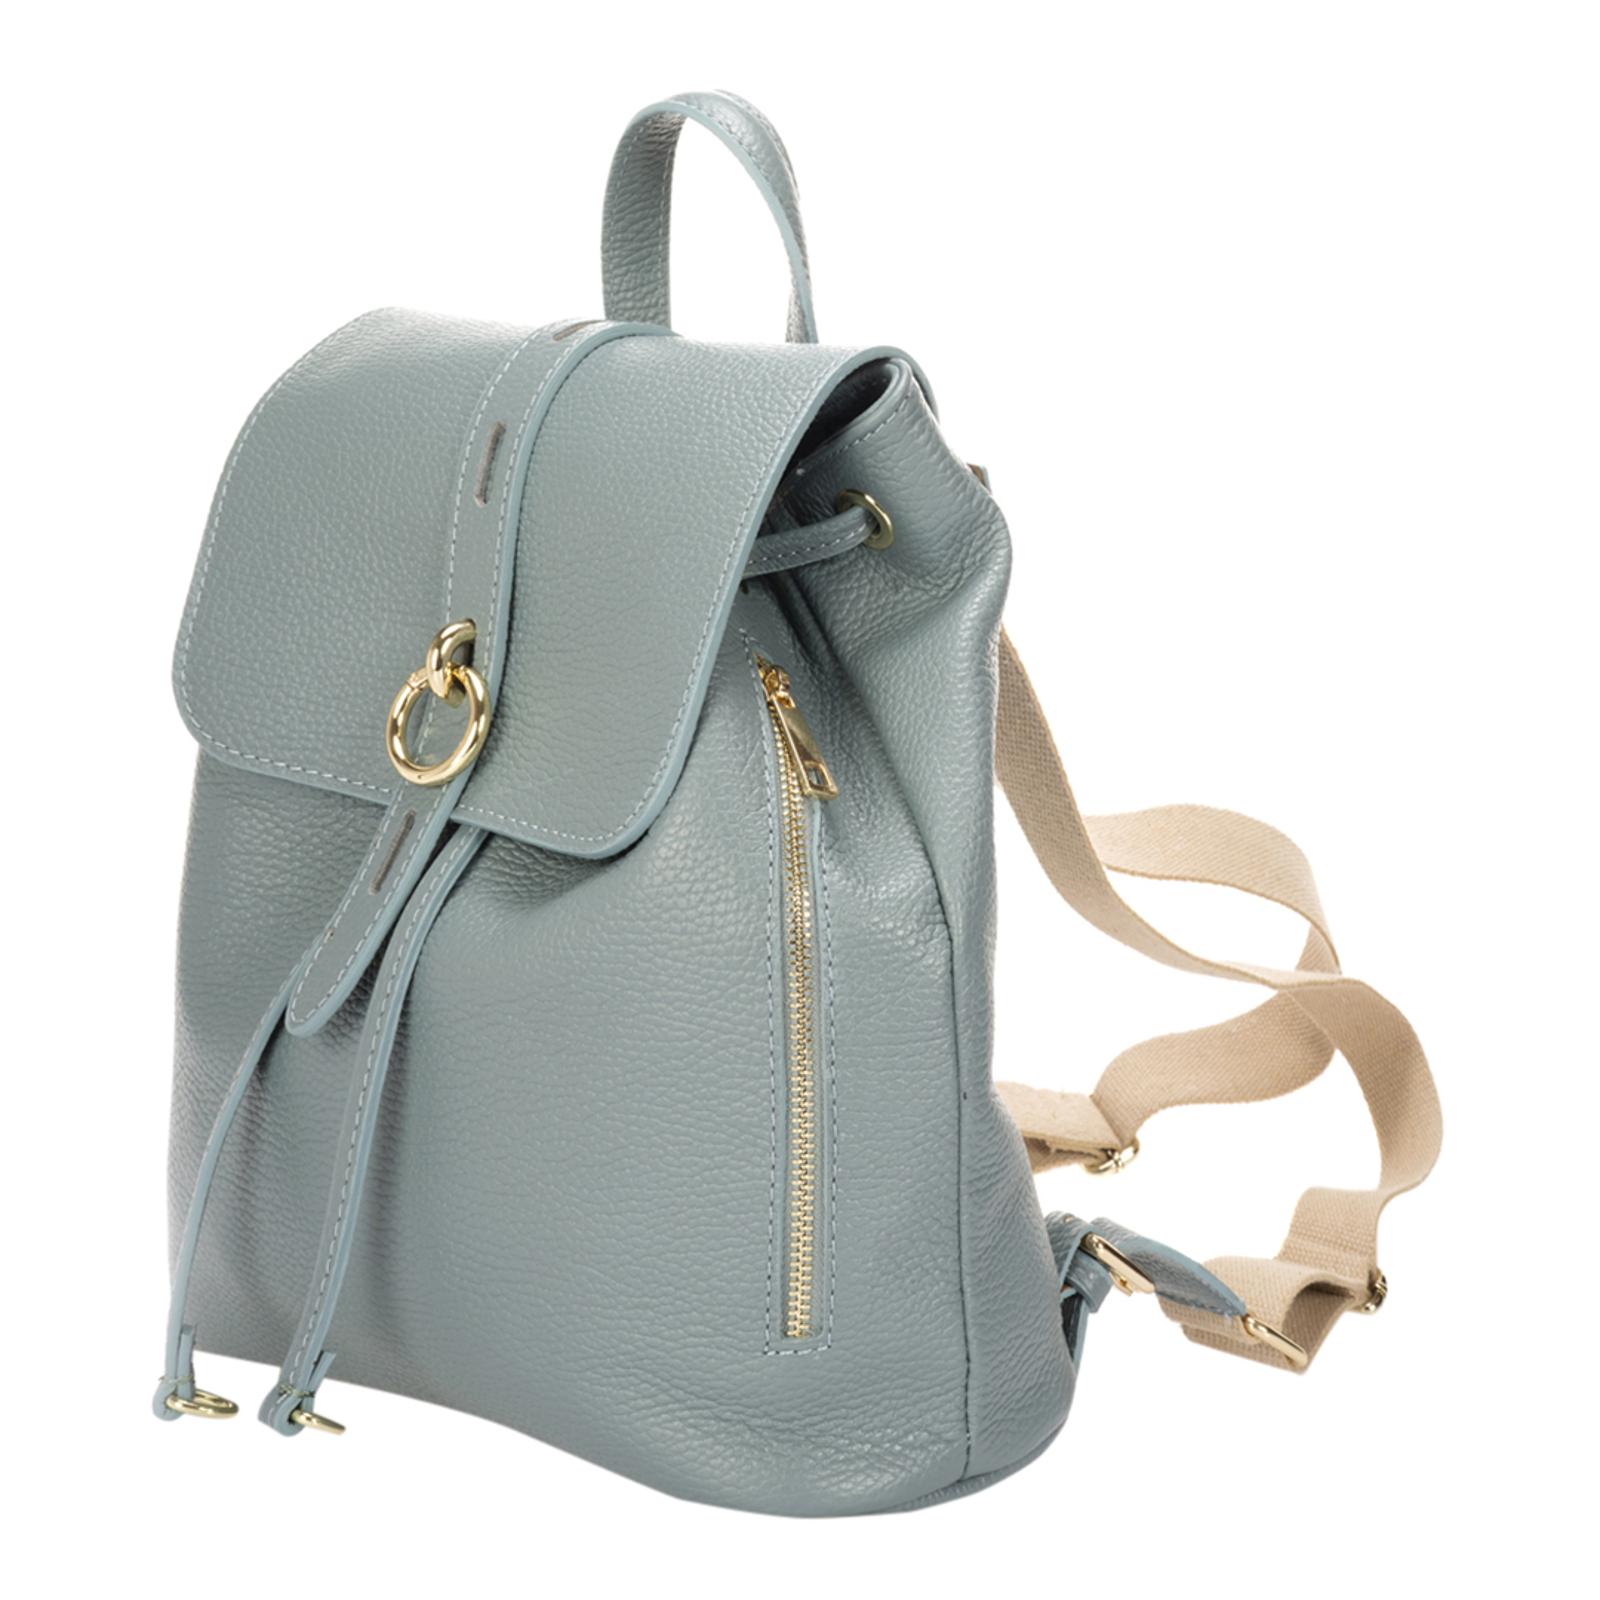 Blue Leather Backpack - BrandAlley